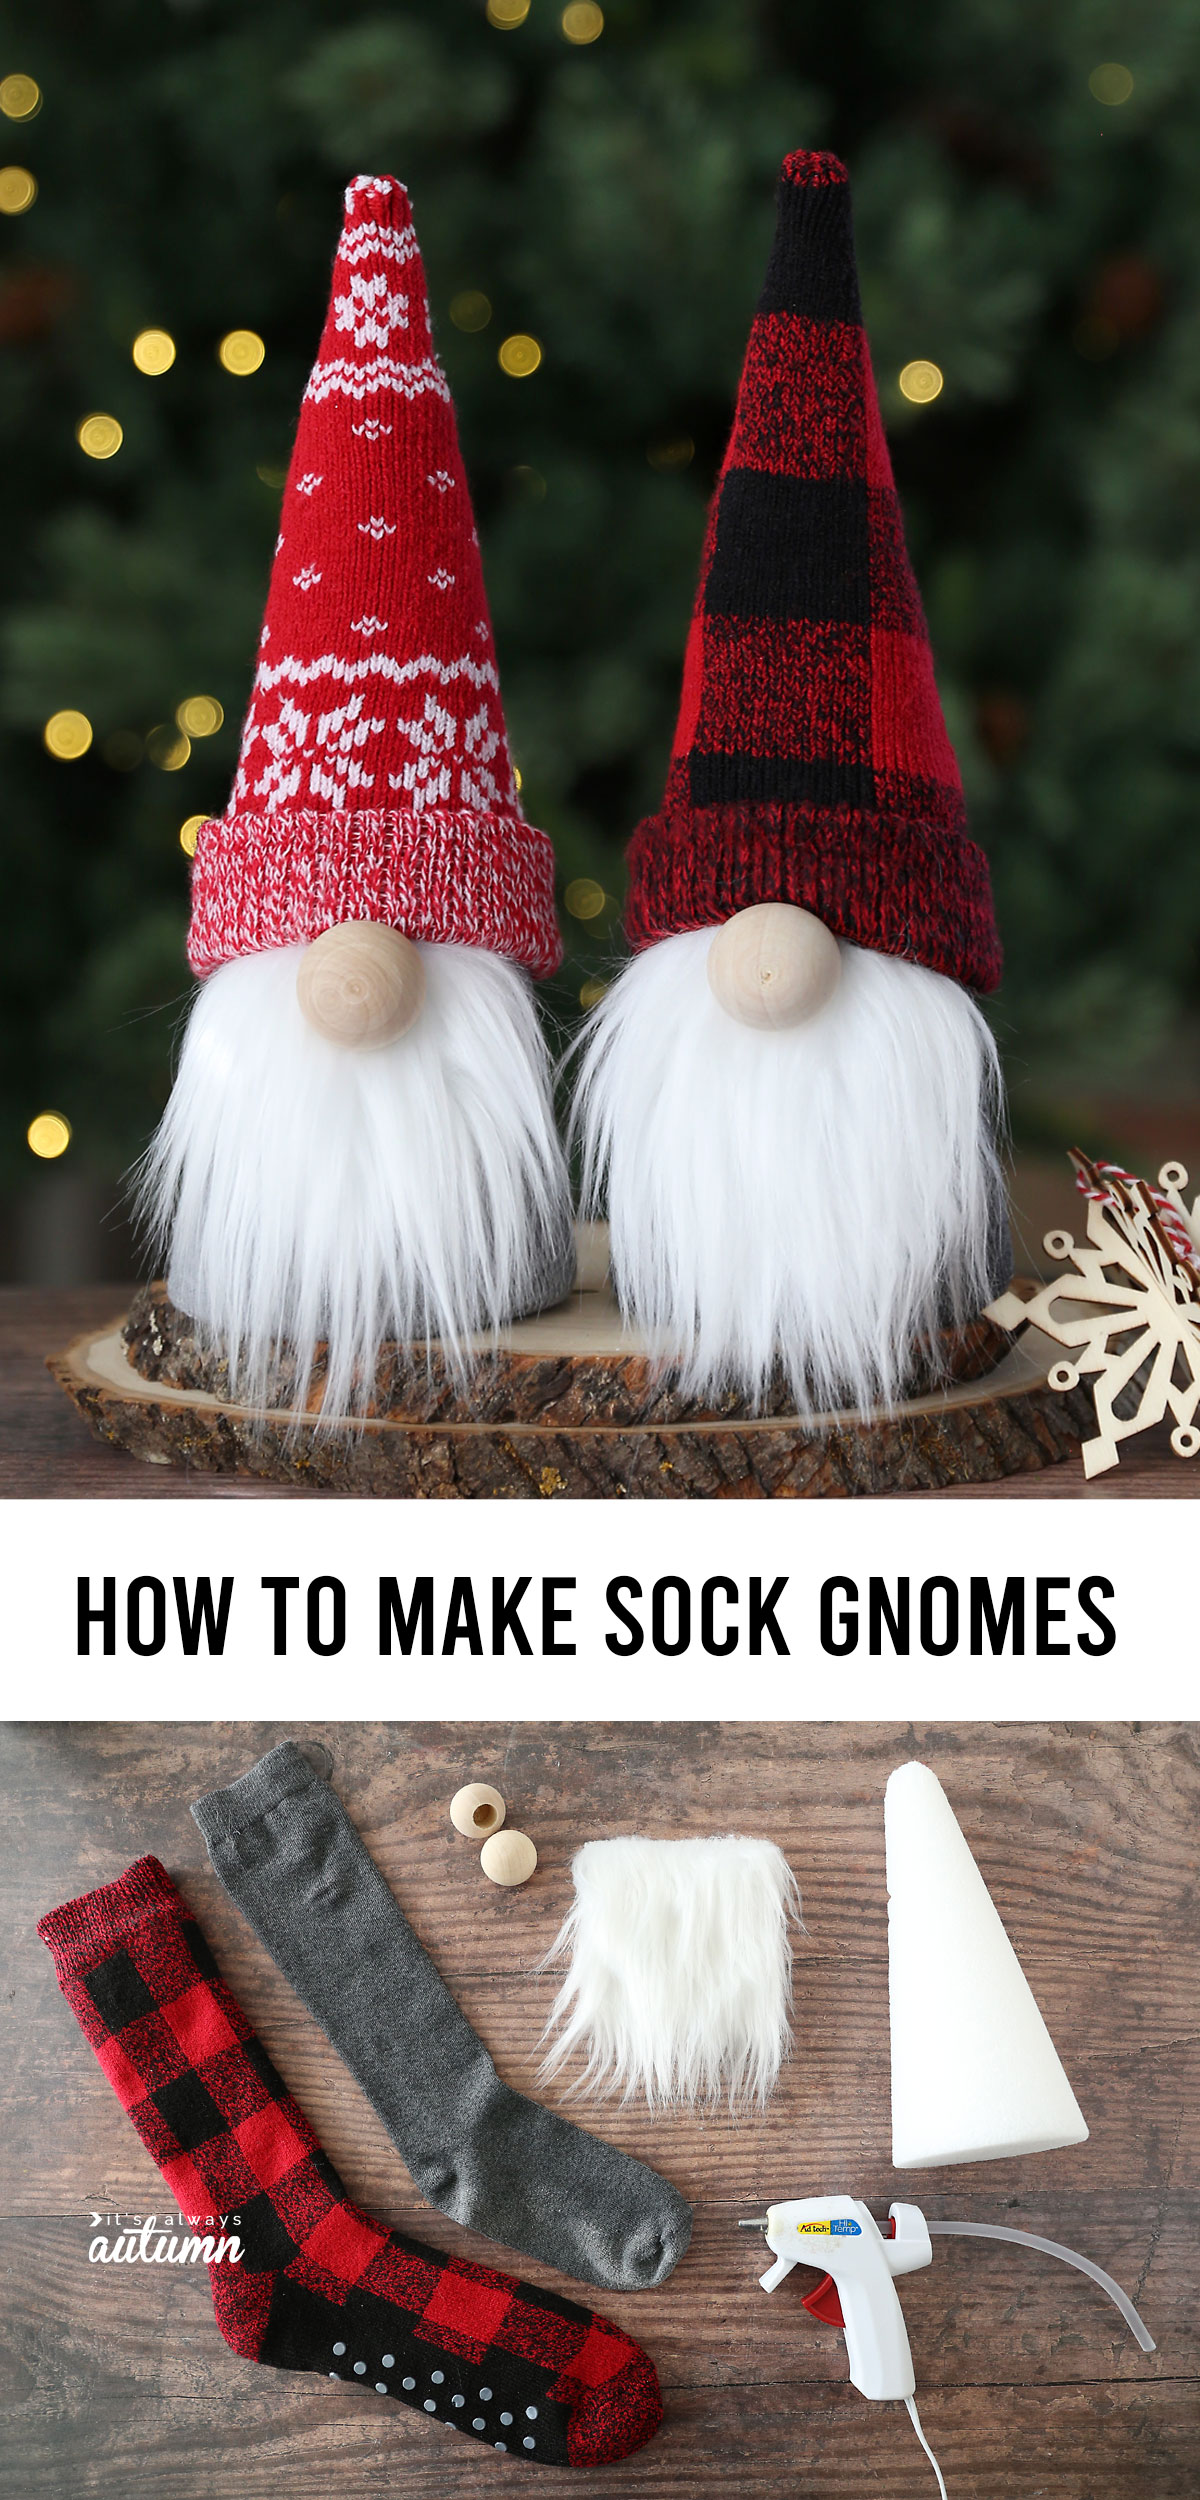 Learn how to make adorable sock gnomes for Christmas or any other holiday!